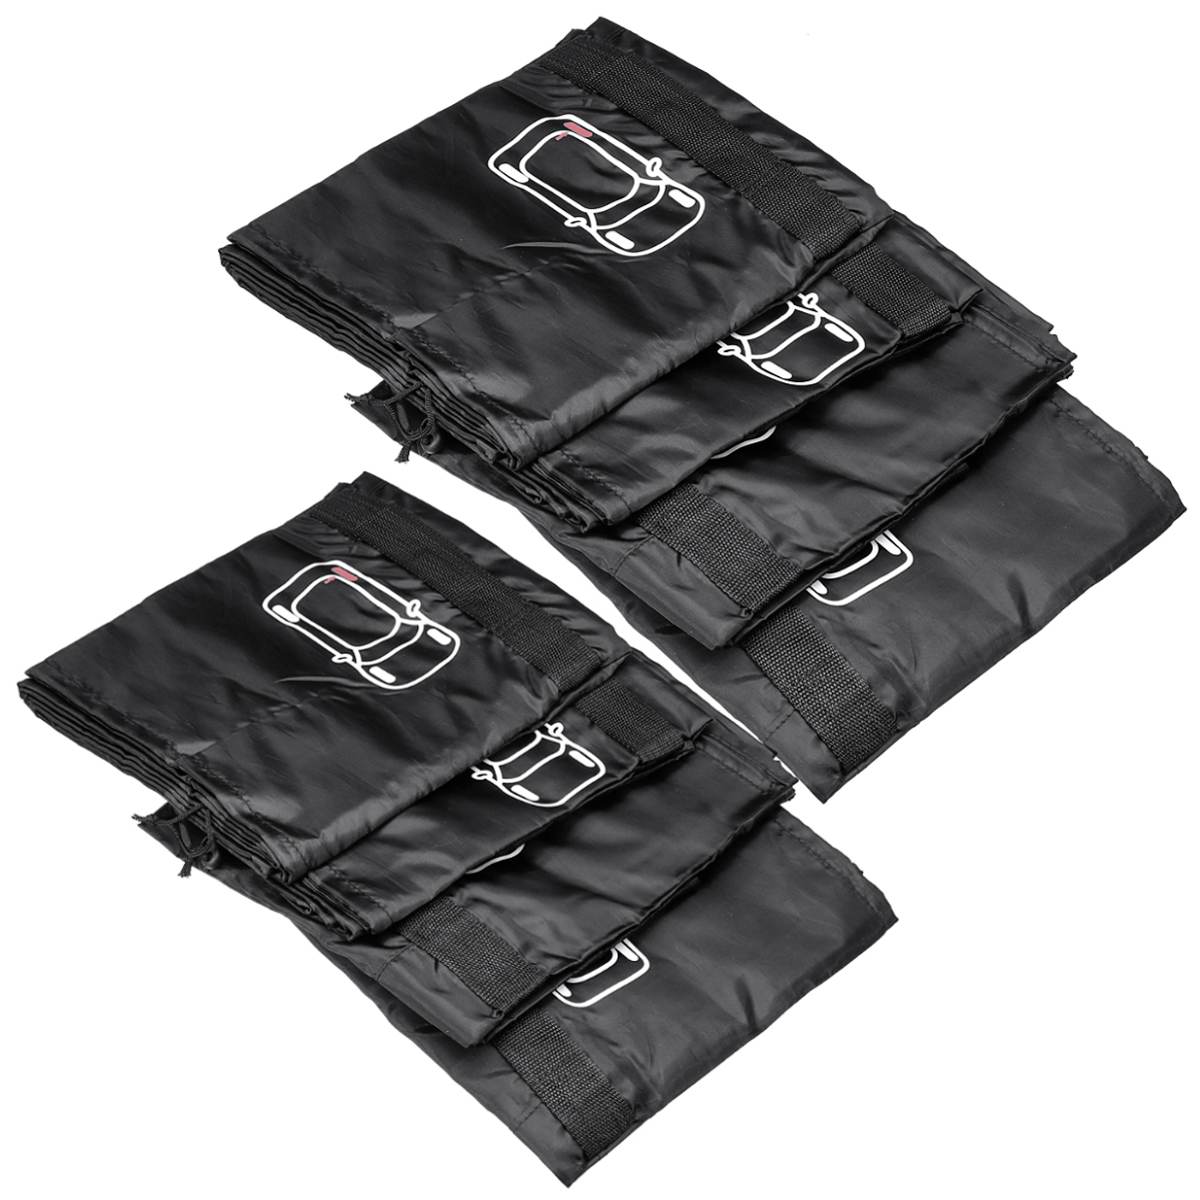 1/2/4pcs Universal Car Spare Tire Covers Case Tires Storage Bags Auto Wheel Tires Storage Bags Tyre Waterproof Polyester Bag